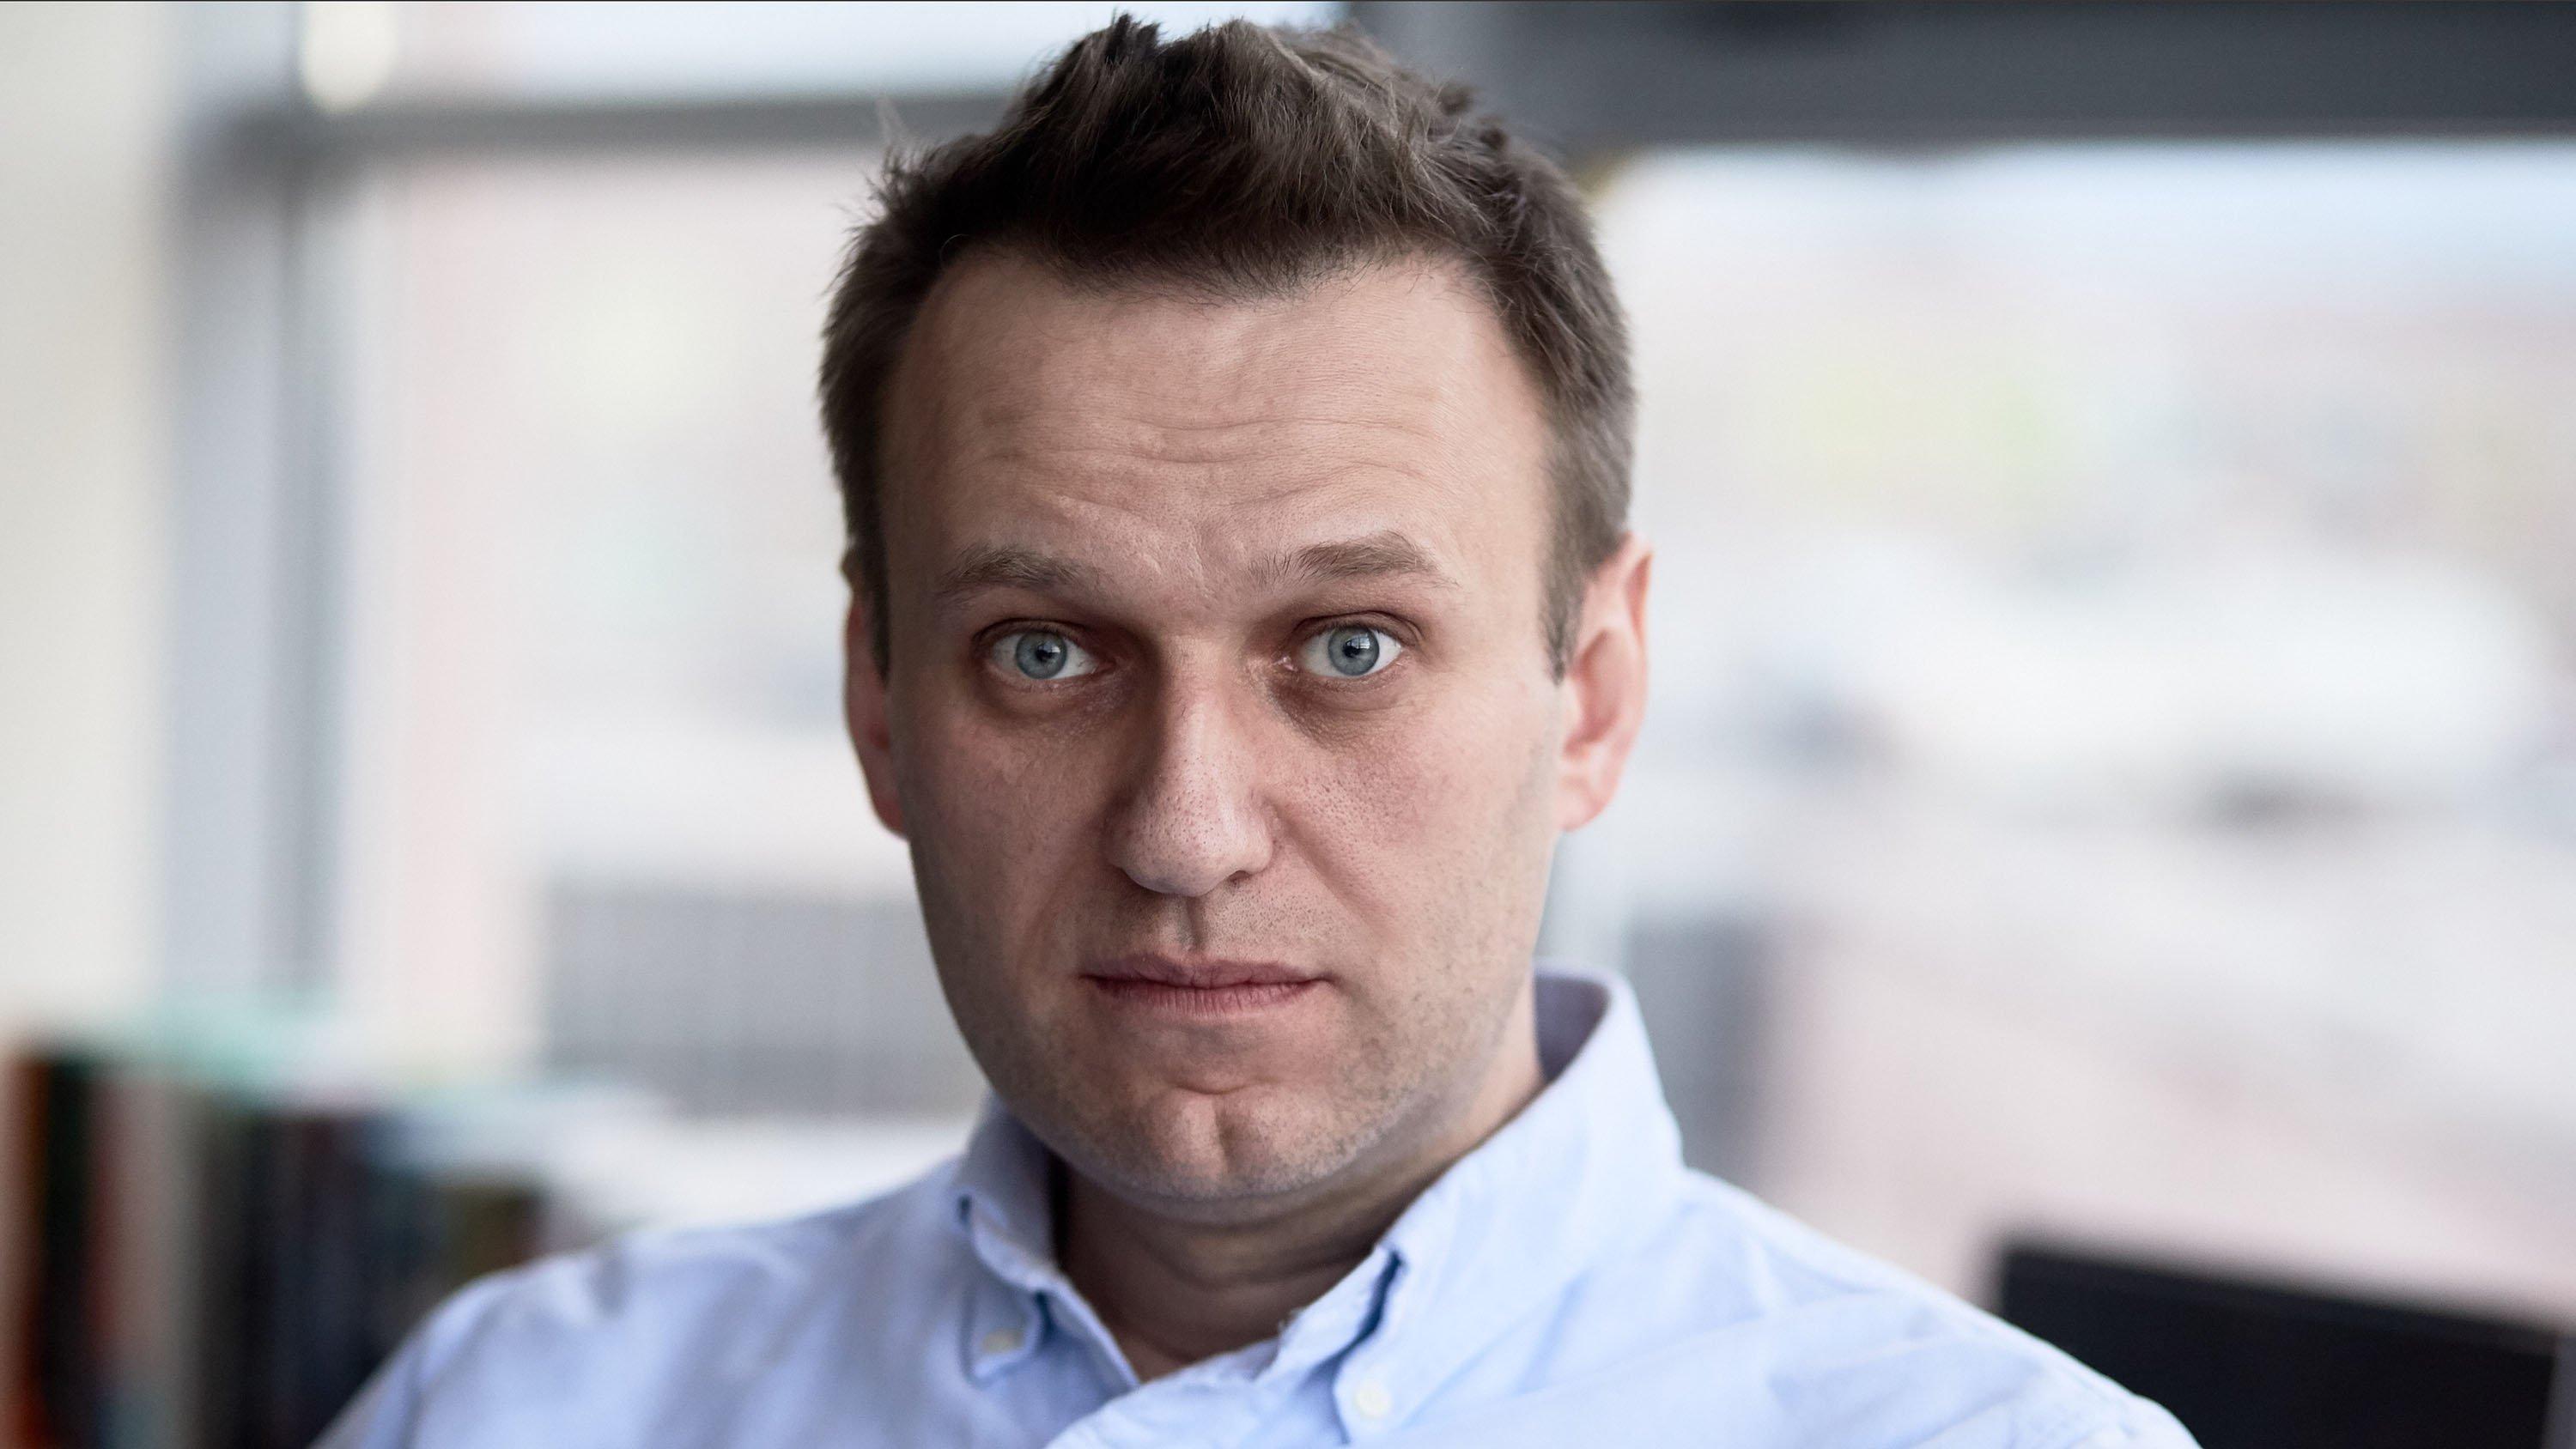 Russian prison threatens to force-feed Navalny